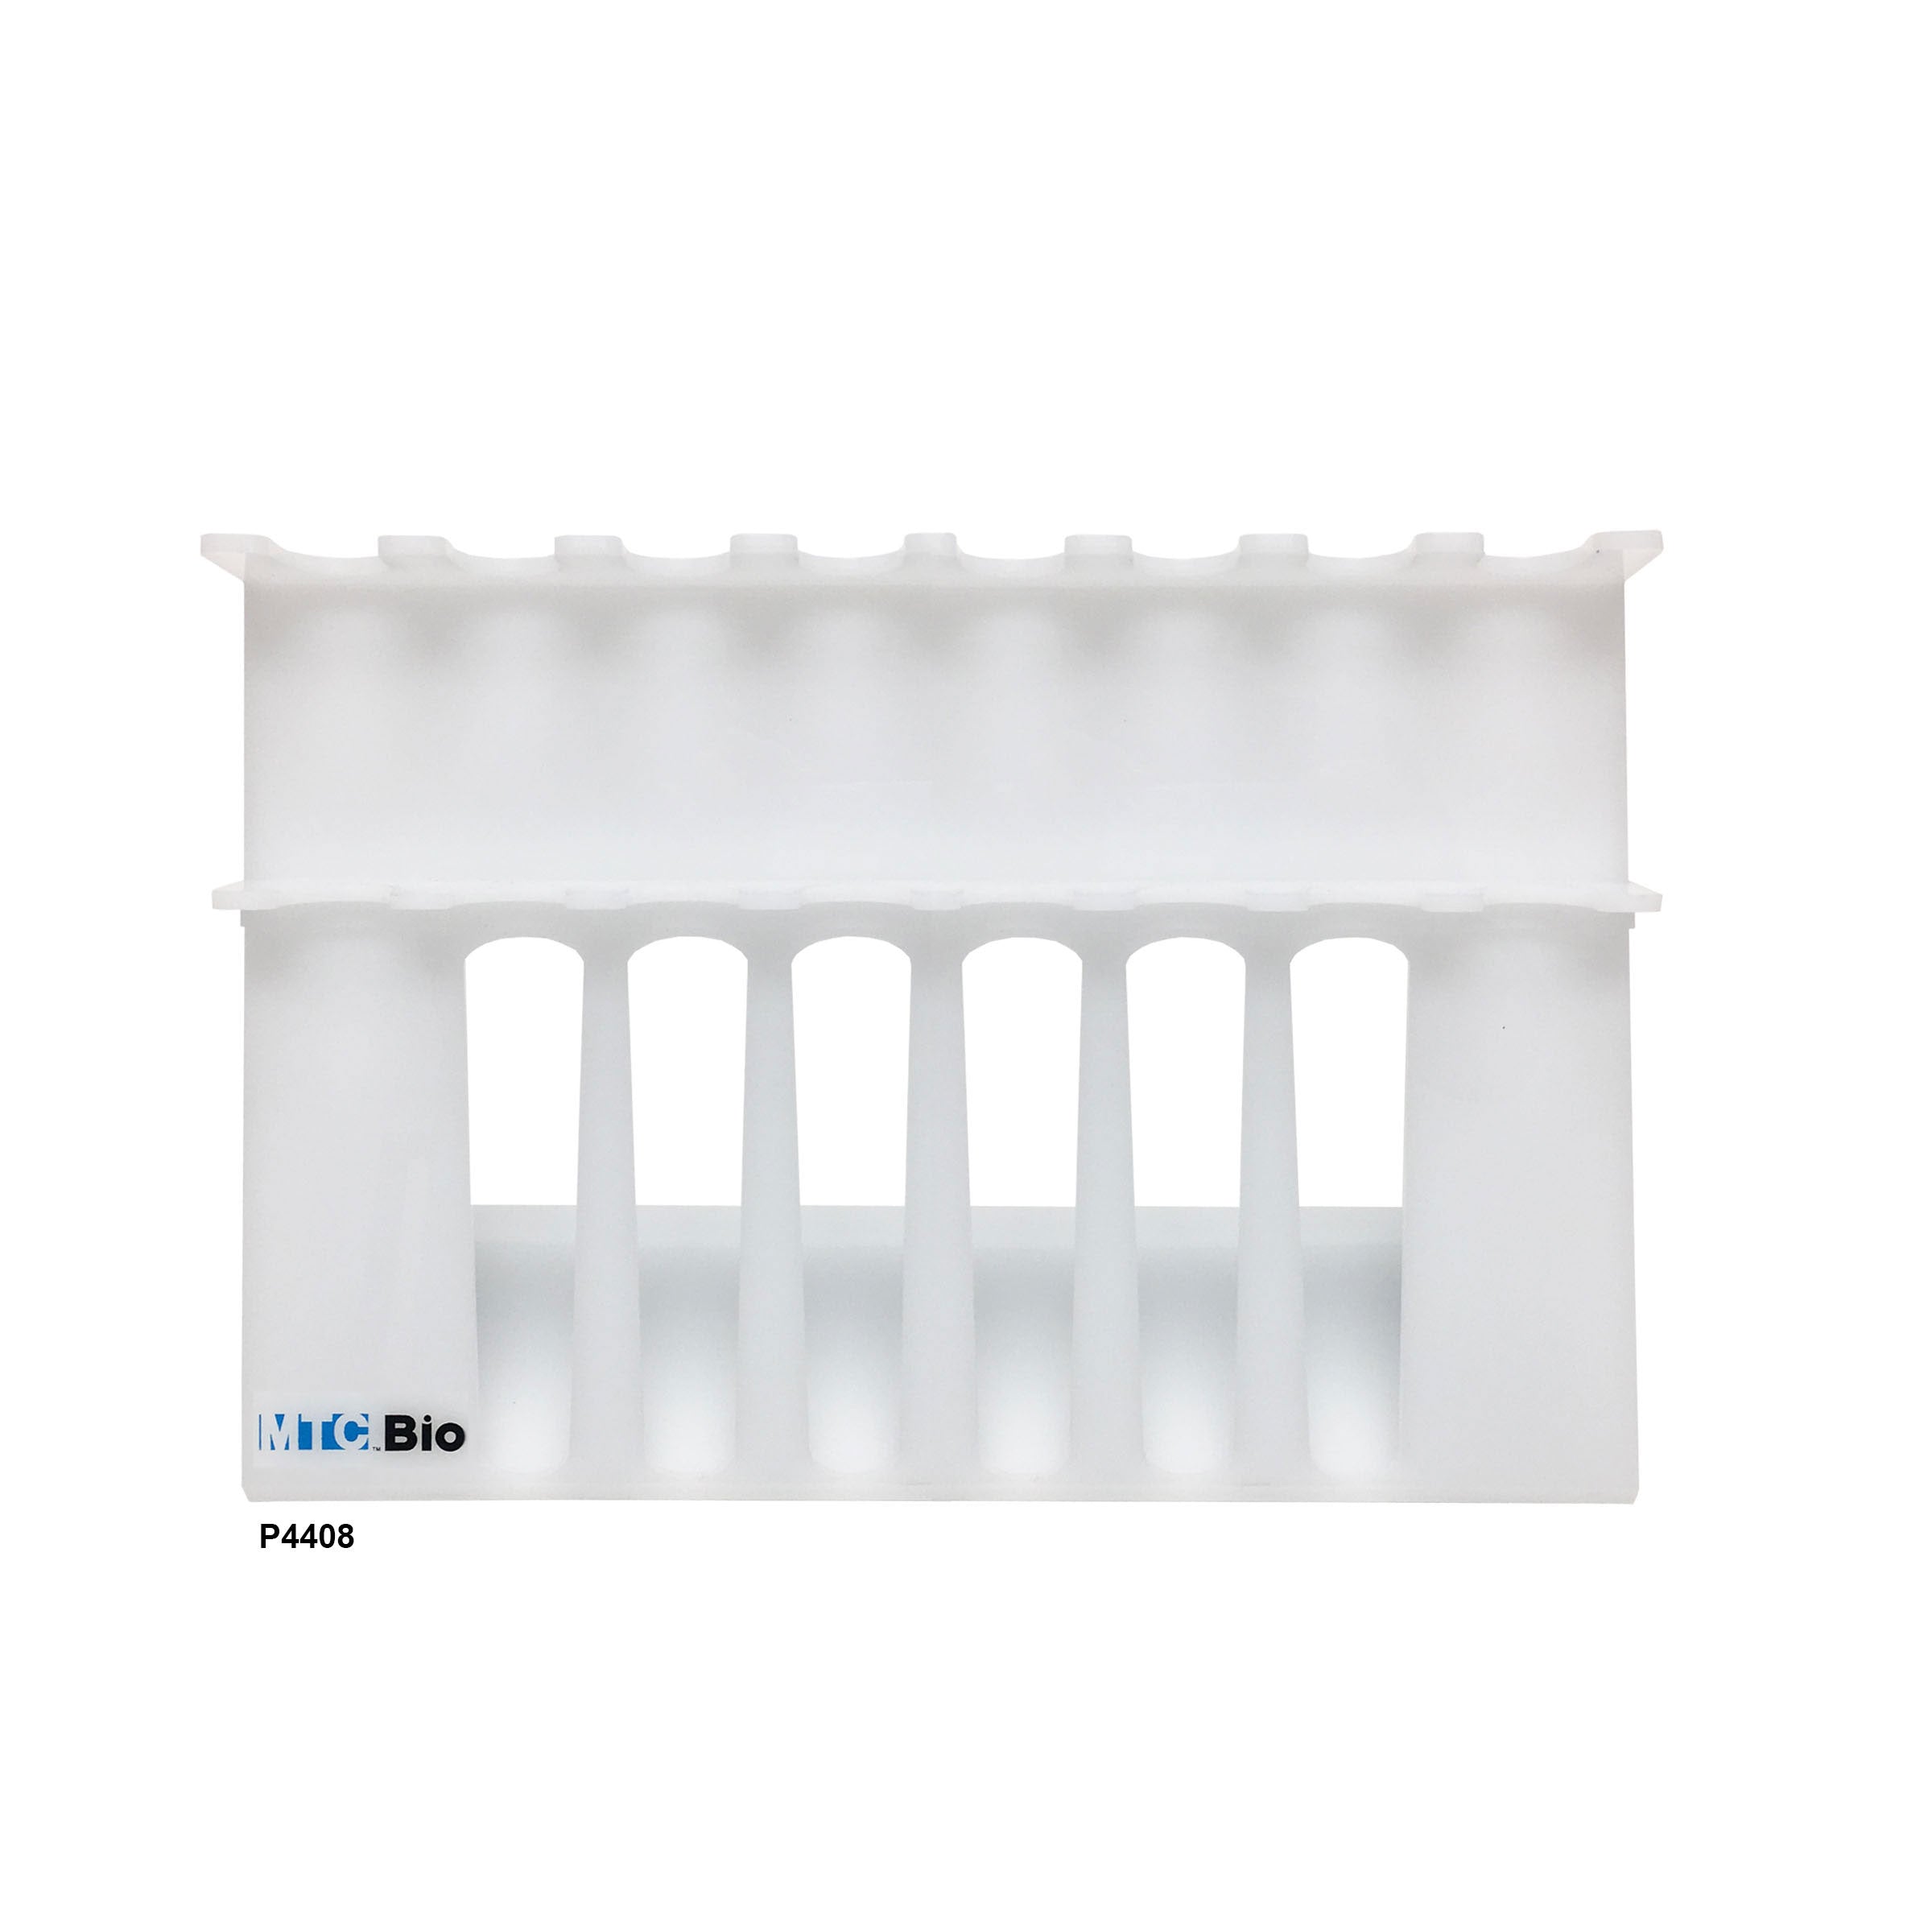 MTC Bio P4408, Surestand Pipette Stand for 8 Pipettes, Up To Six Multi-Channels, Acrylic